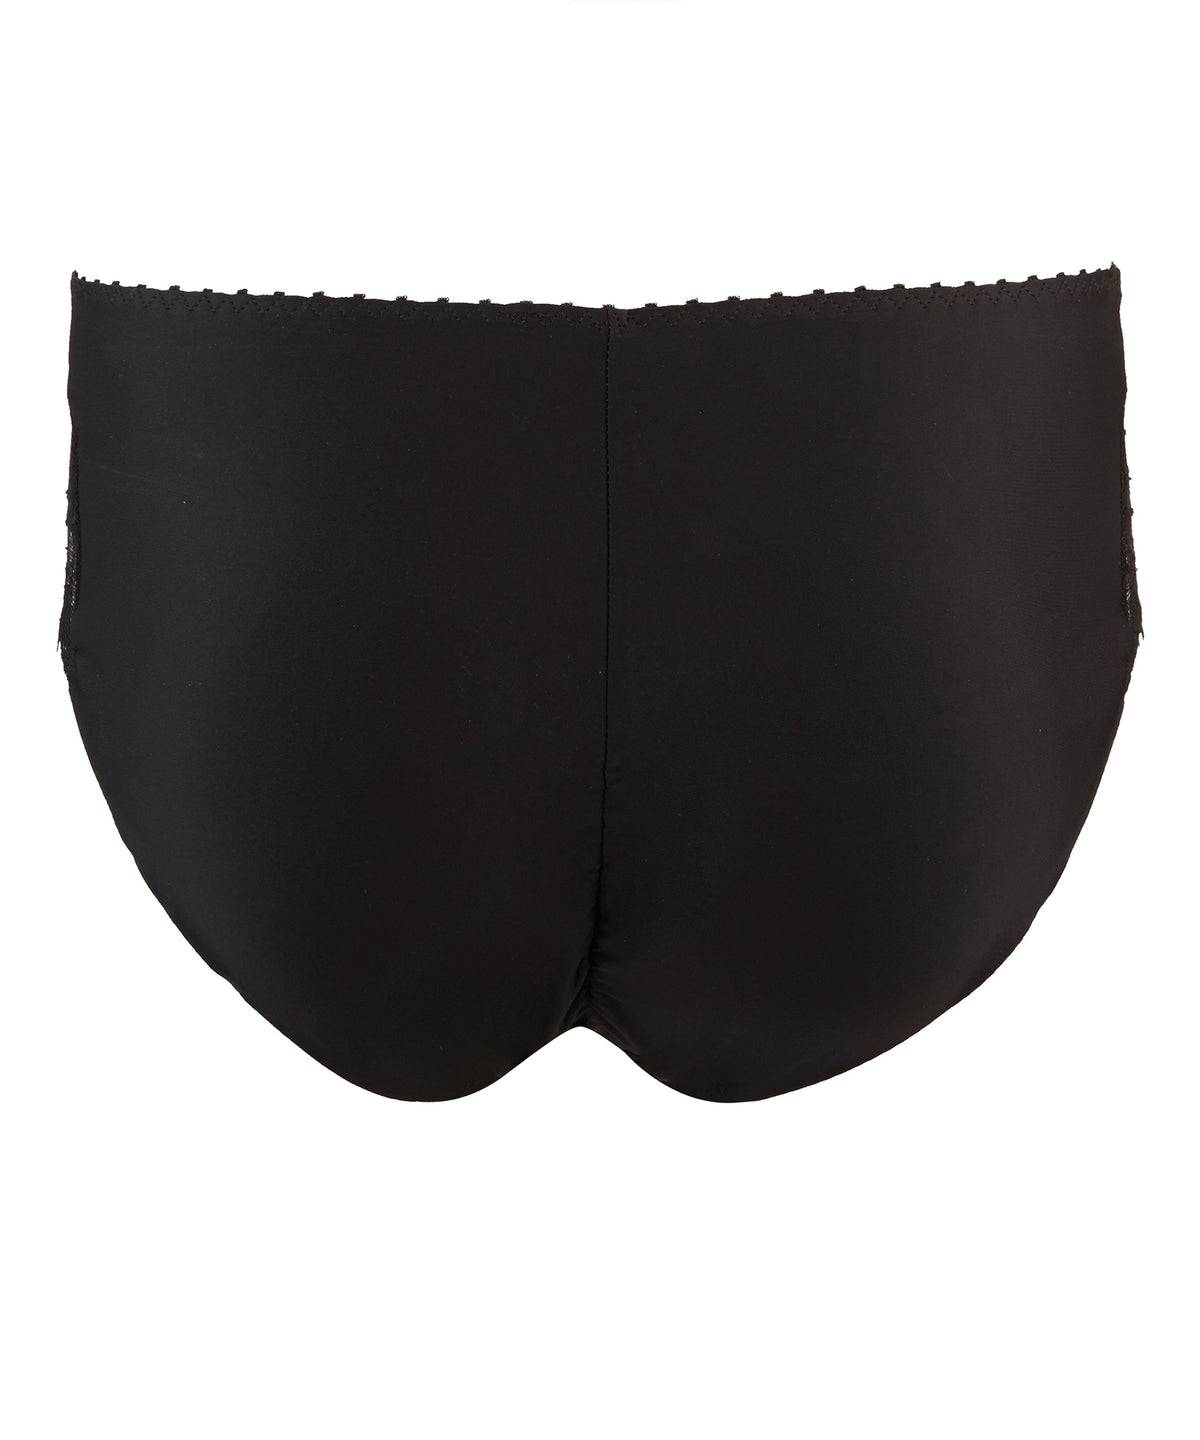 Aubade a L'Amour Black Shaping Brief